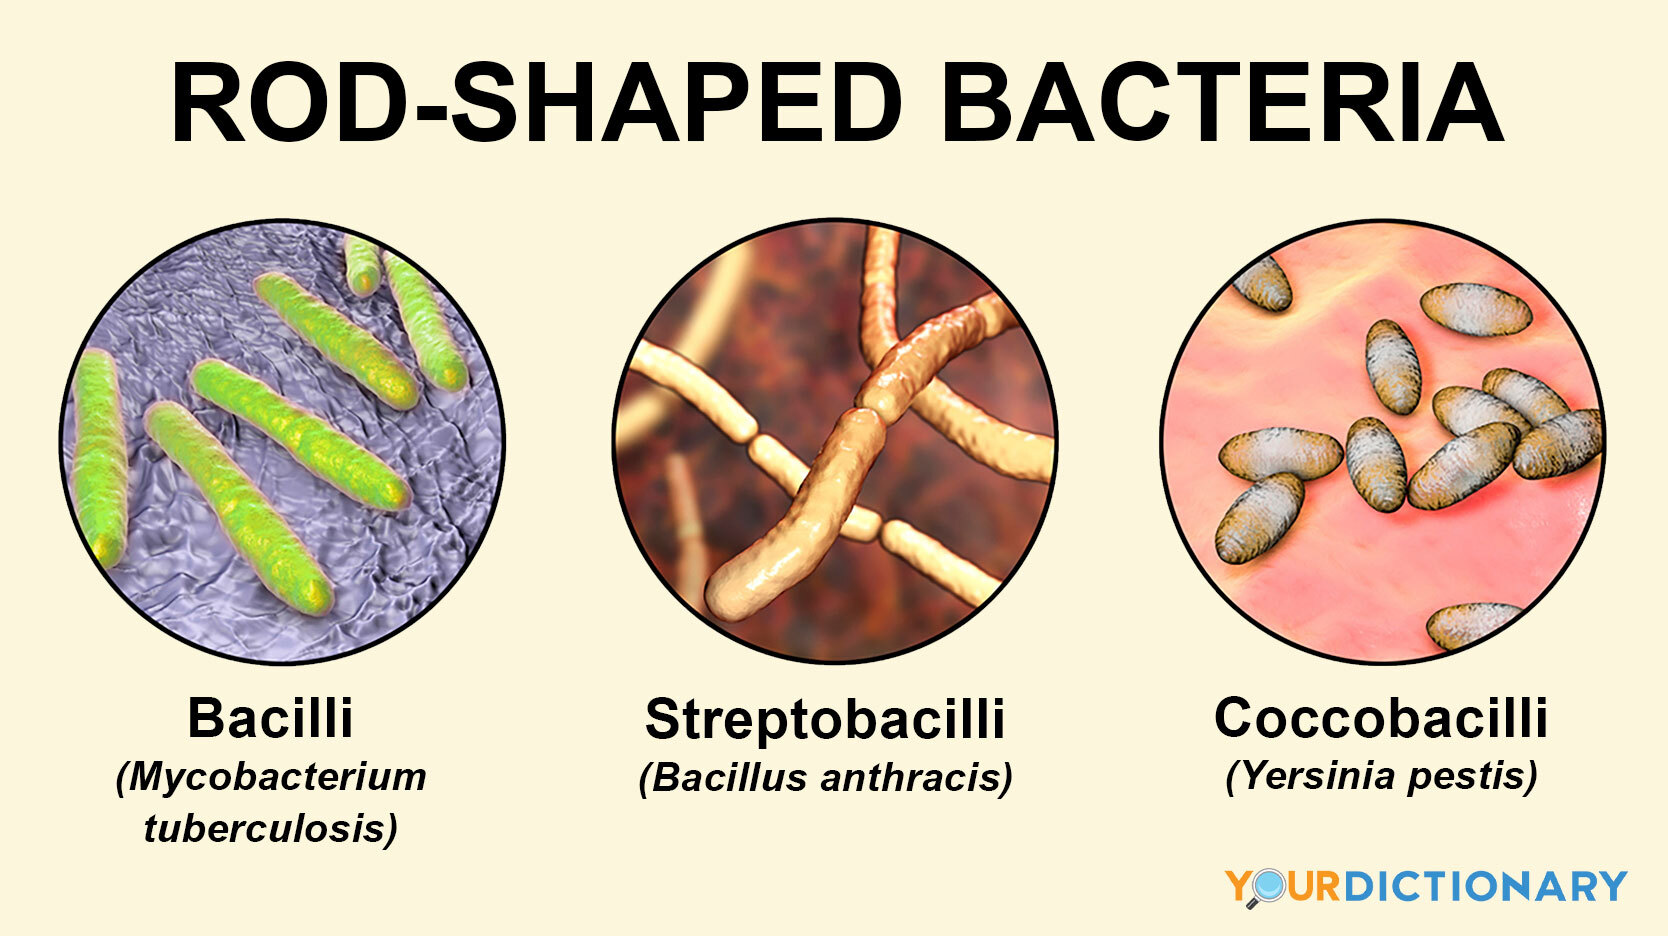 examples of bacteria that are rod-shaped